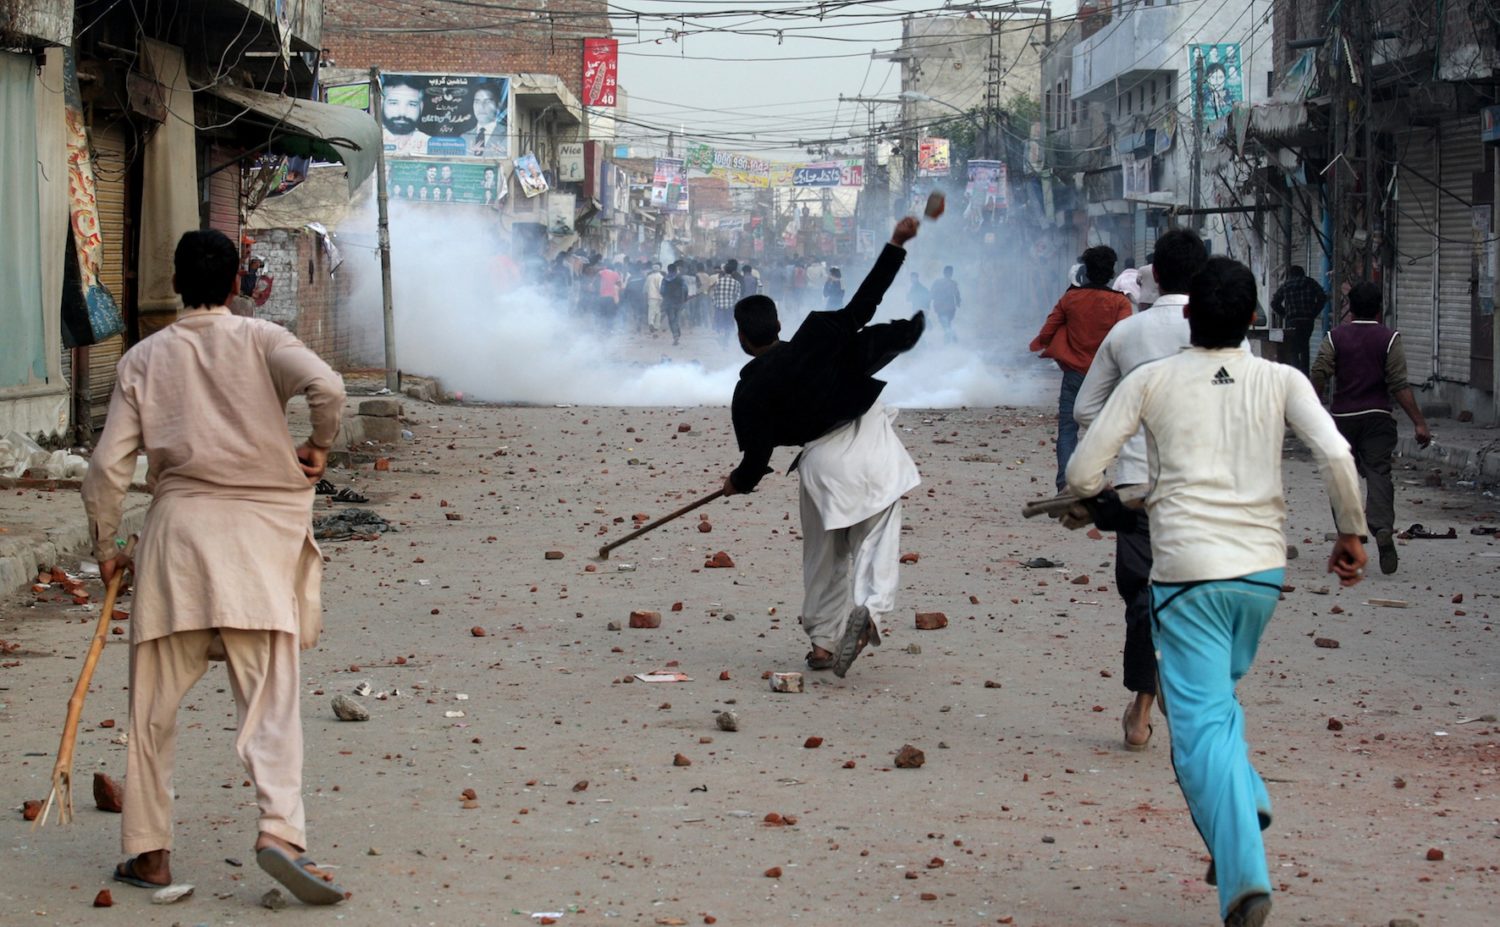 Pakistani protesters throw rocks during clashes with police to condemn Sunday's suicide bombings that struck two churches, in Lahore, Pakistan, Monday, March 16, 2015. Pakistani police fired tear gas on Monday after Christian protesters clashed with police in the eastern city of Lahore, a day after Taliban bombers killed more than a dozen people in suicide attacks on two churches in the city. (AP Photo/K.M. Chaudary)